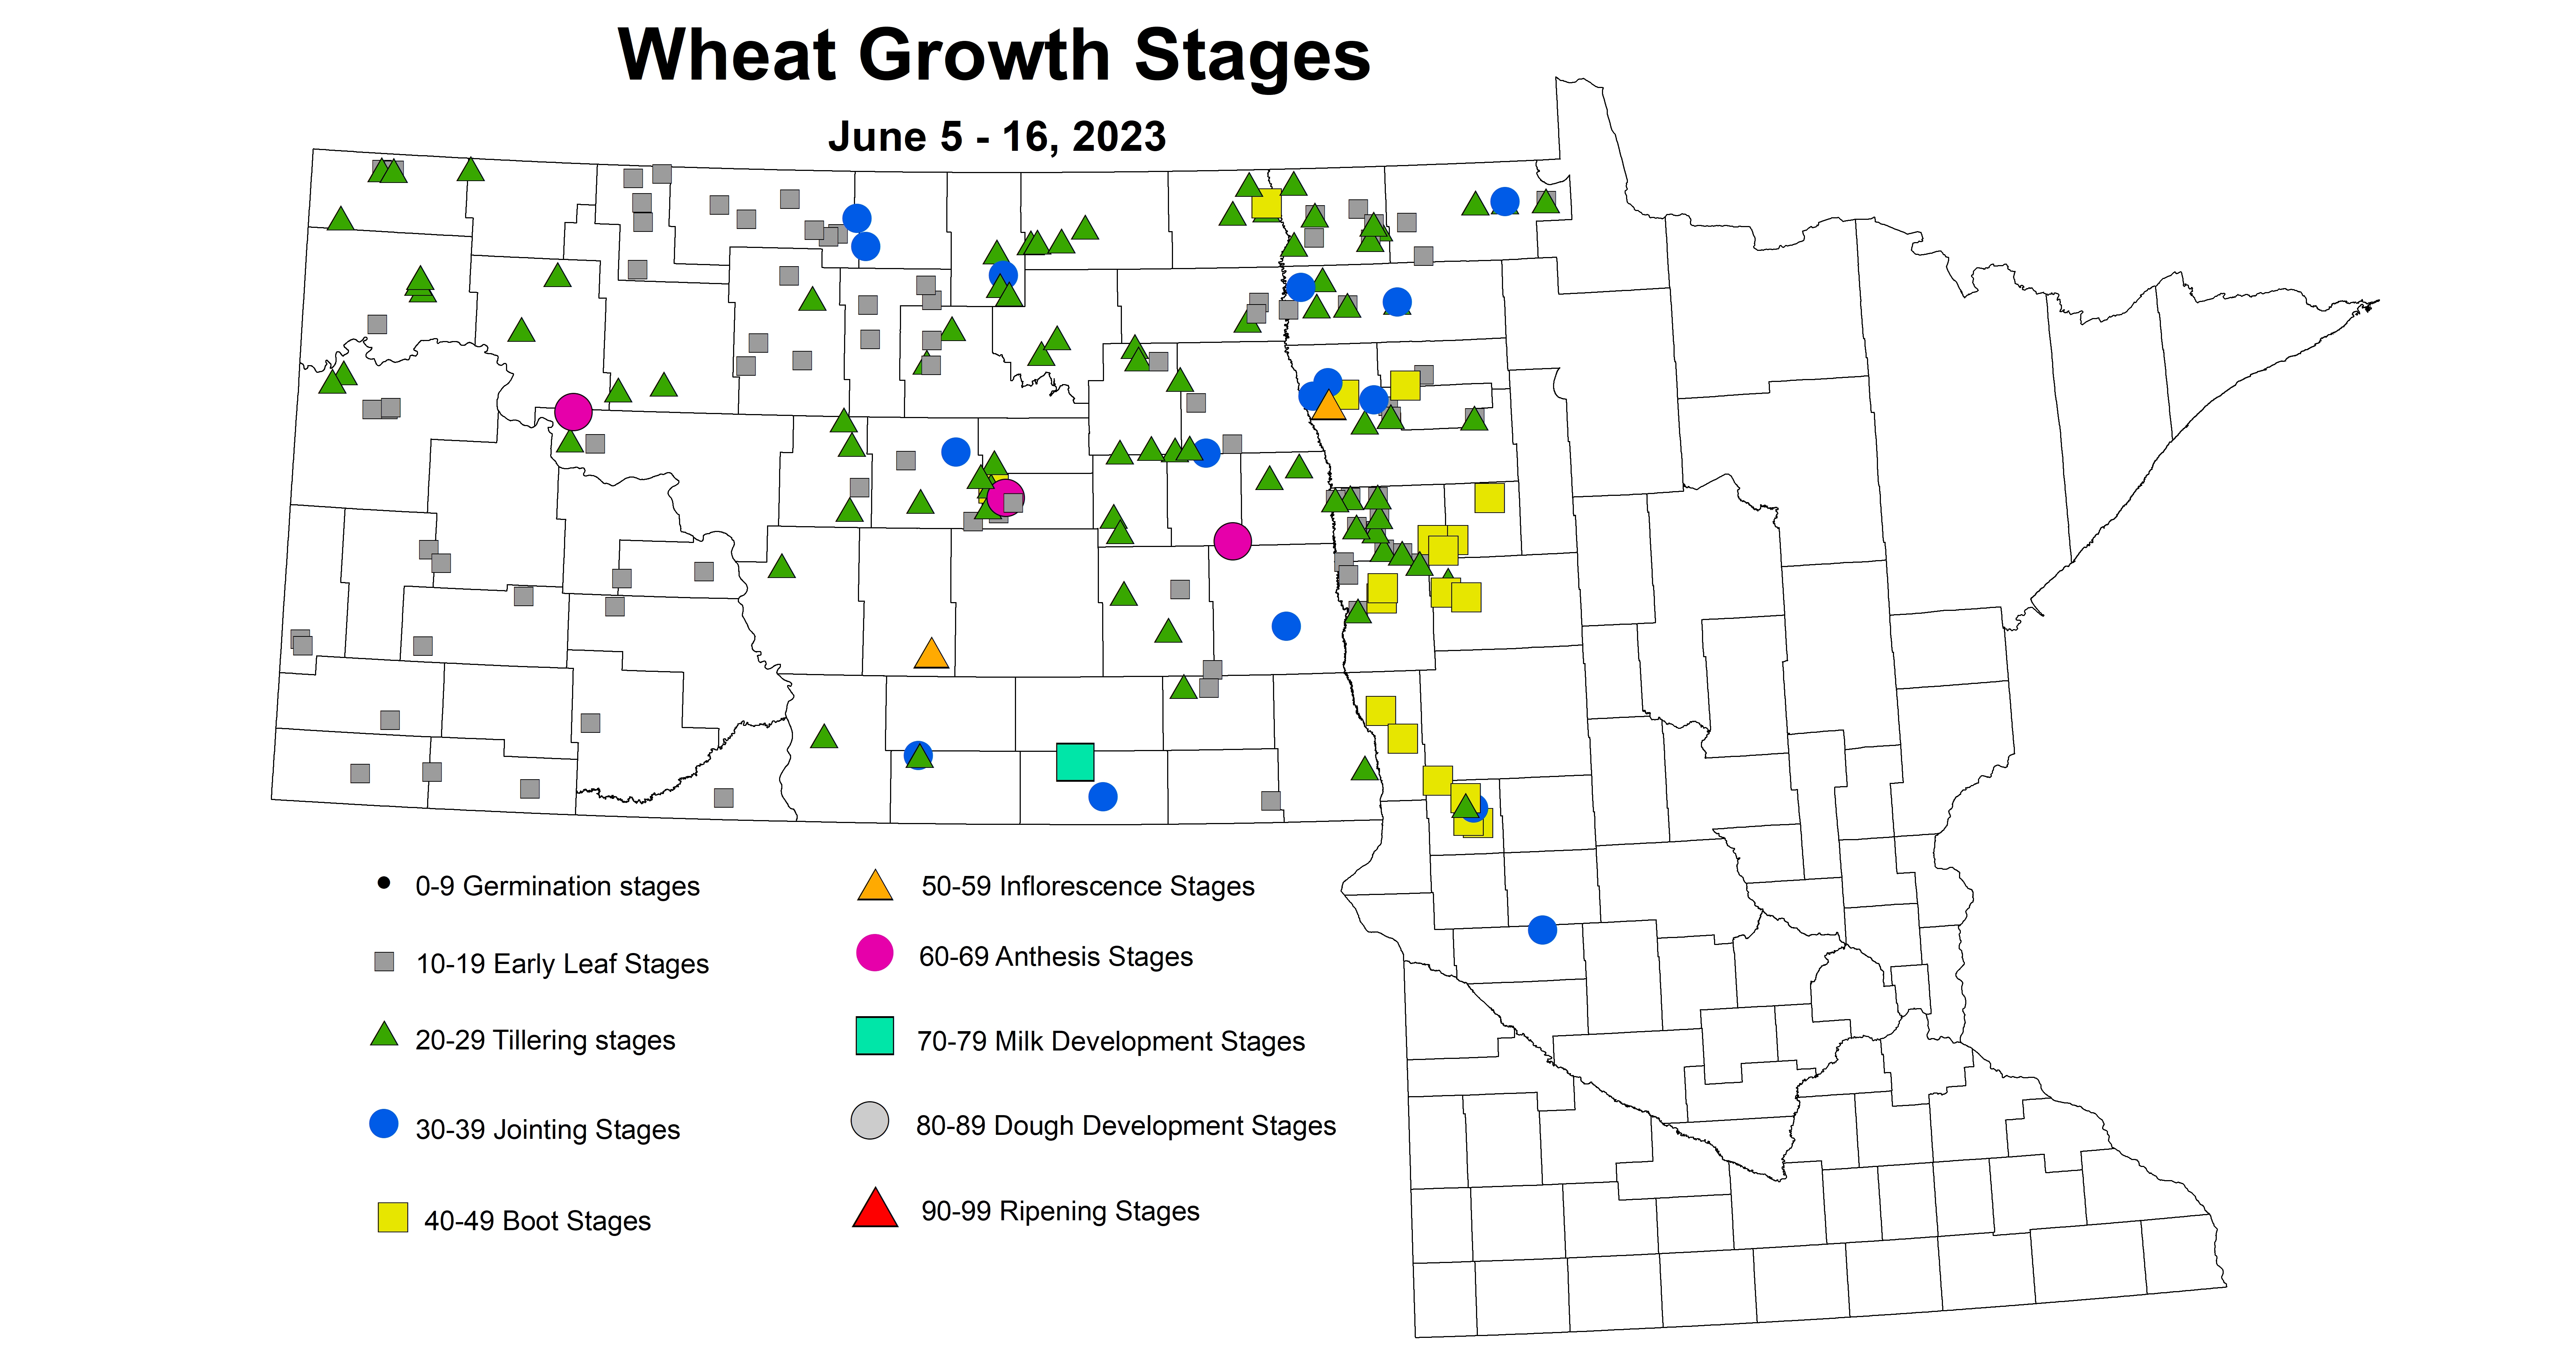 wheat growth stages June 5-16 2023